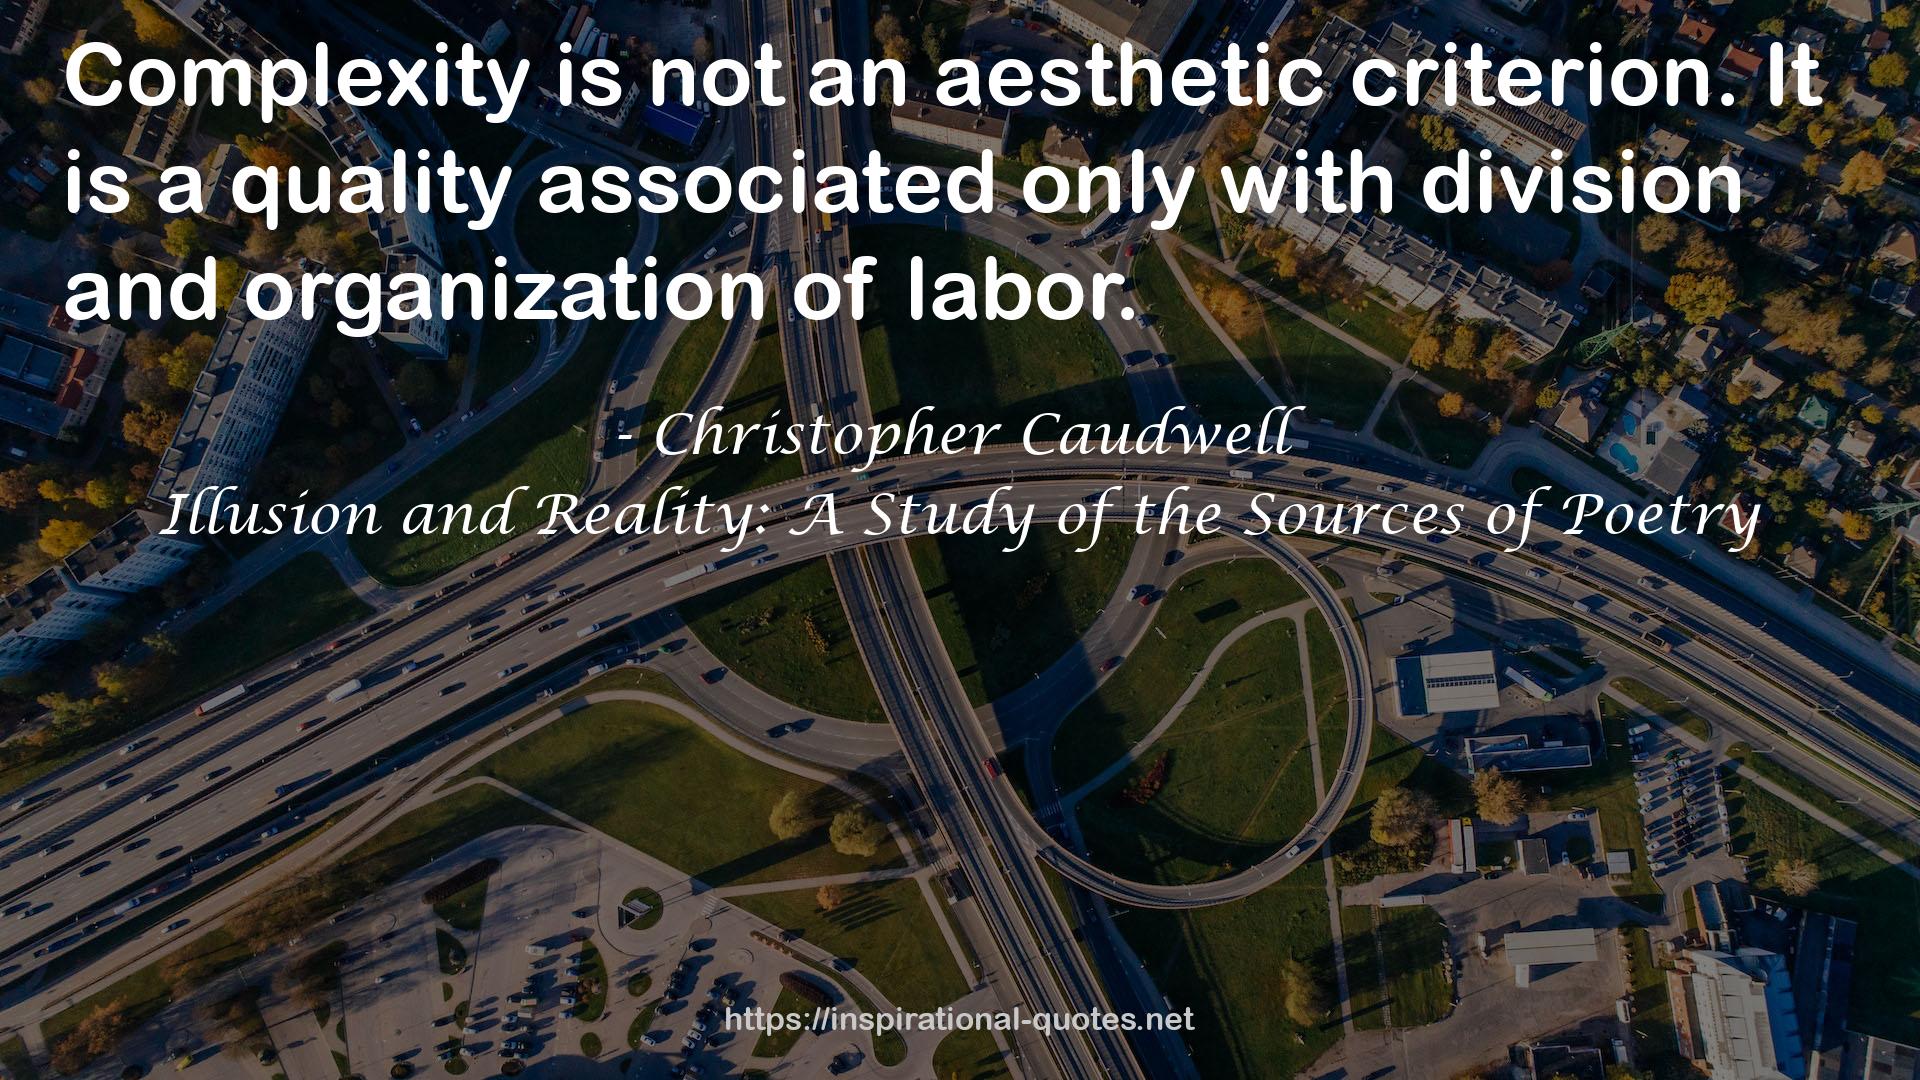 Christopher Caudwell QUOTES